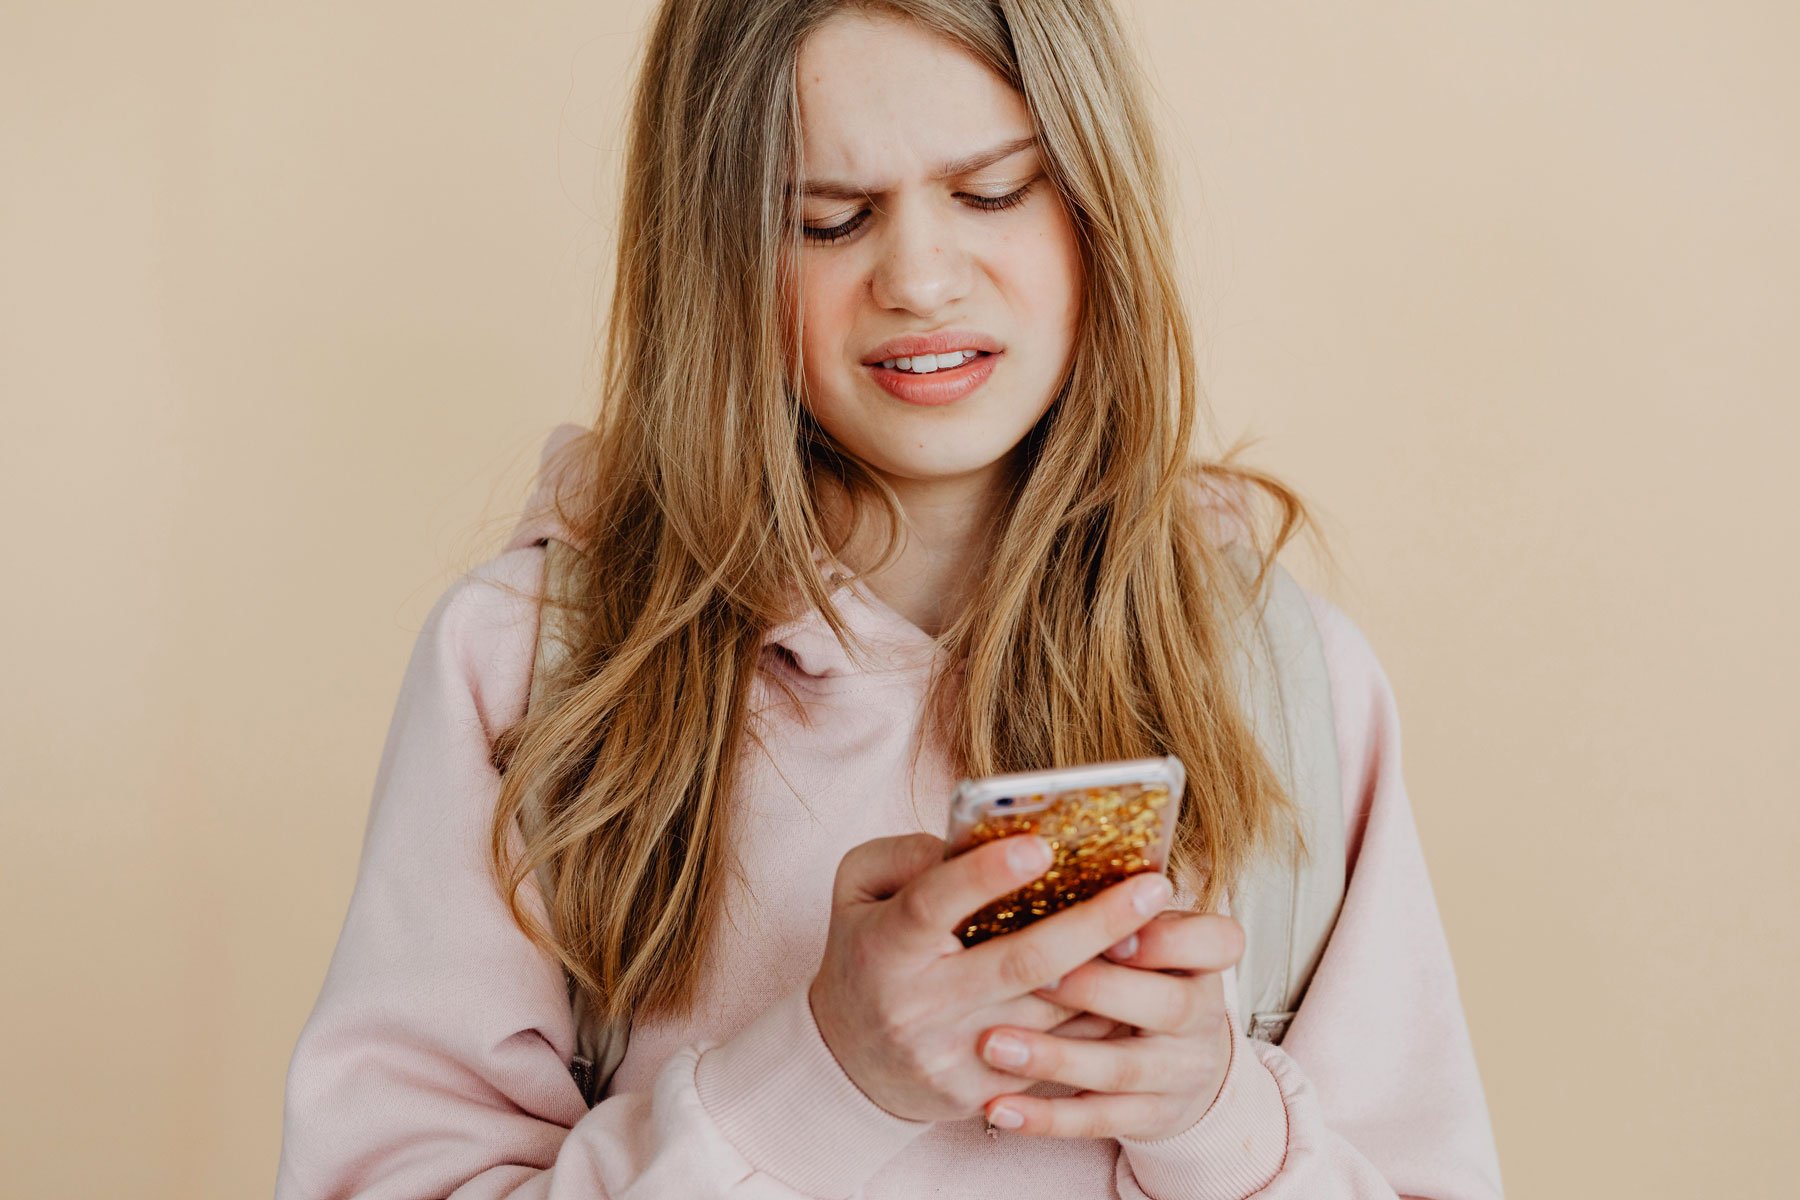 Are Smartphones to Blame for iGen's Unhappiness?